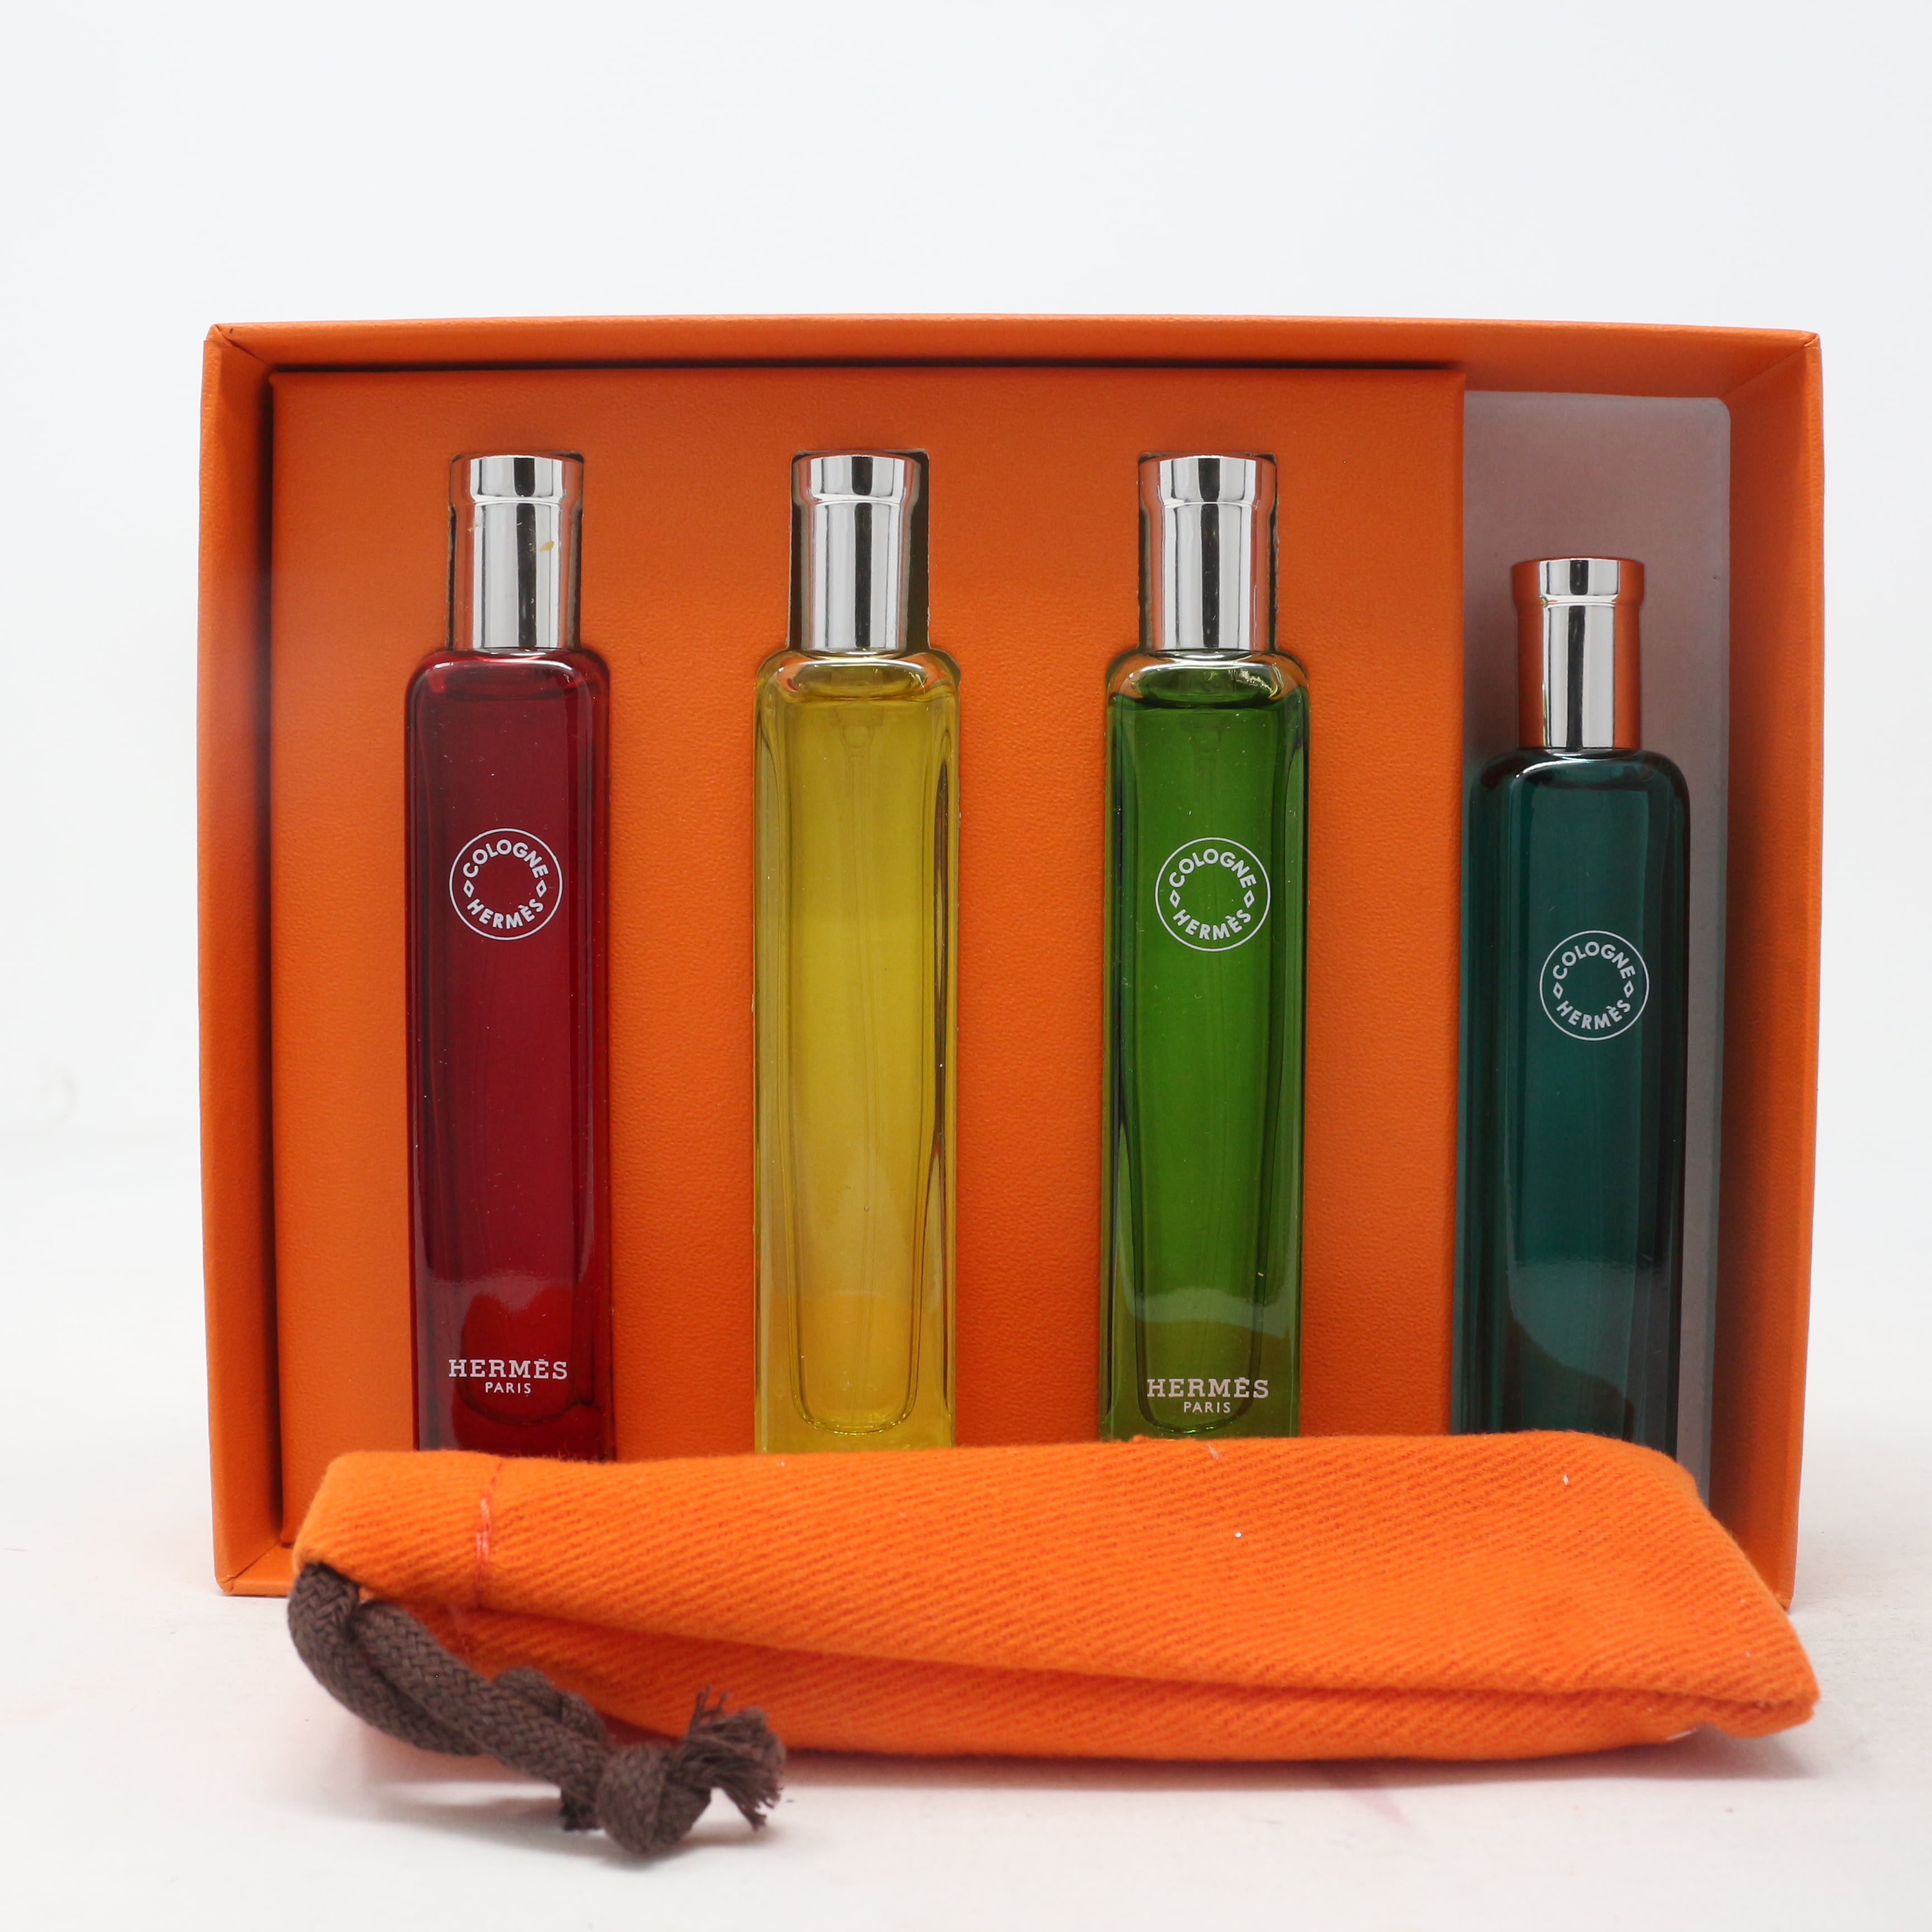 Hermes Hermes Colognes Collection 4-Pcs Travel Set / New With Box ...